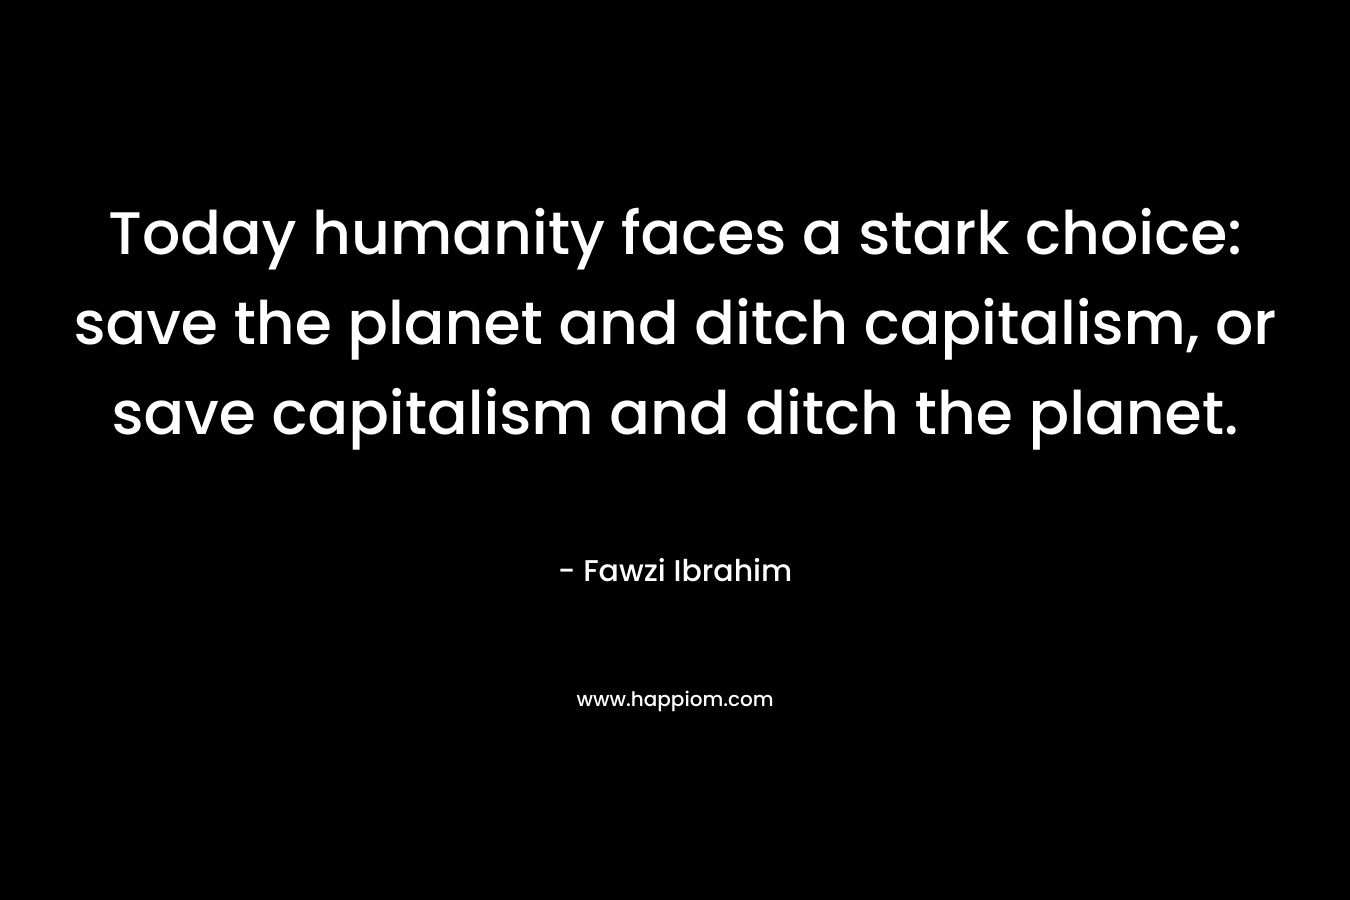 Today humanity faces a stark choice: save the planet and ditch capitalism, or save capitalism and ditch the planet.